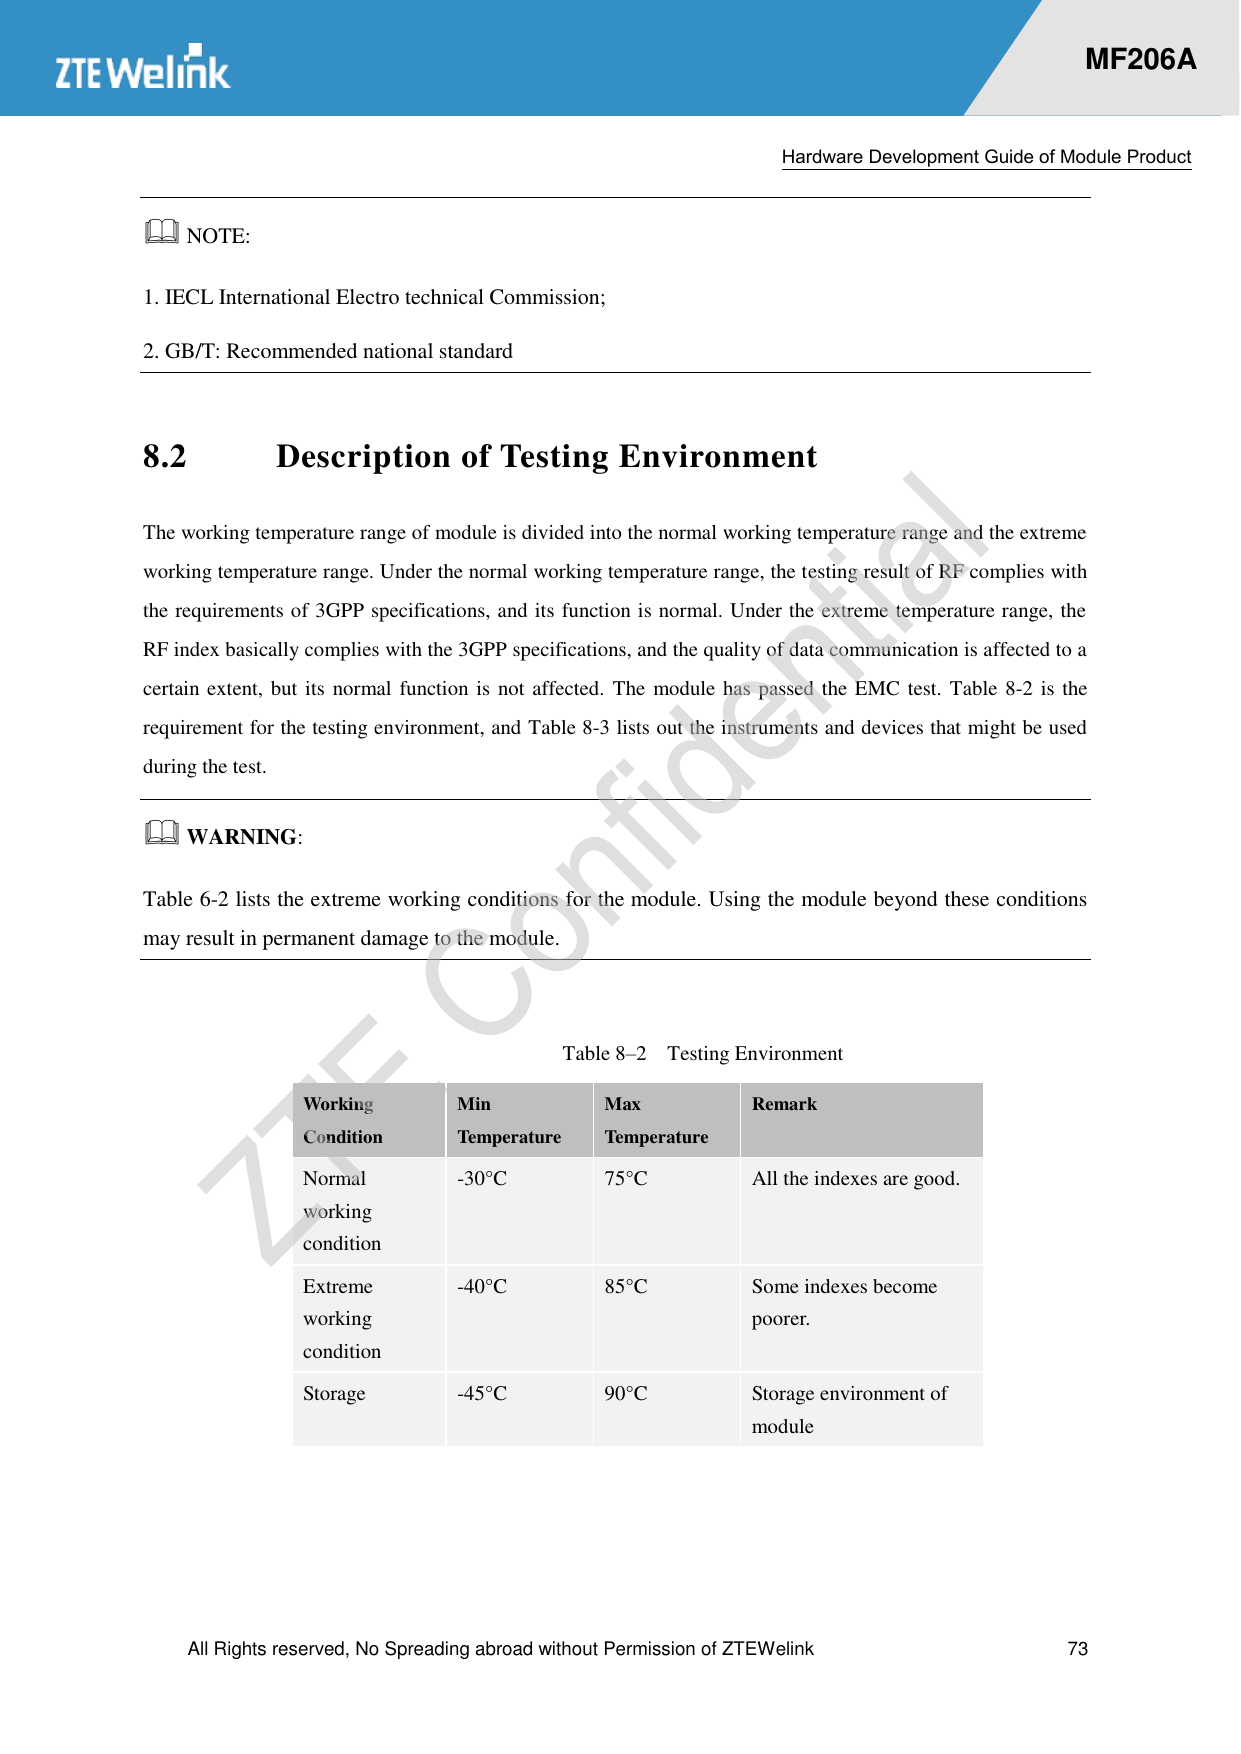  Hardware Development Guide of Module Product  All Rights reserved, No Spreading abroad without Permission of ZTEWelink  73    MF206A  NOTE:   1. IECL International Electro technical Commission;   2. GB/T: Recommended national standard   8.2 Description of Testing Environment The working temperature range of module is divided into the normal working temperature range and the extreme working temperature range. Under the normal working temperature range, the testing result of RF complies with the requirements of 3GPP specifications, and its function is normal. Under the extreme temperature range, the RF index basically complies with the 3GPP specifications, and the quality of data communication is affected to a certain extent, but its normal function is not affected. The module has passed the EMC test. Table 8-2 is the requirement for the testing environment, and Table 8-3 lists out the instruments and devices that might be used during the test.    WARNING:   Table 6-2 lists the extreme working conditions for the module. Using the module beyond these conditions may result in permanent damage to the module.  Table 8–2  Testing Environment Working Condition Min Temperature Max Temperature Remark Normal working condition -30°C 75°C All the indexes are good.   Extreme working condition -40°C 85°C Some indexes become poorer.   Storage -45°C  90°C Storage environment of module   